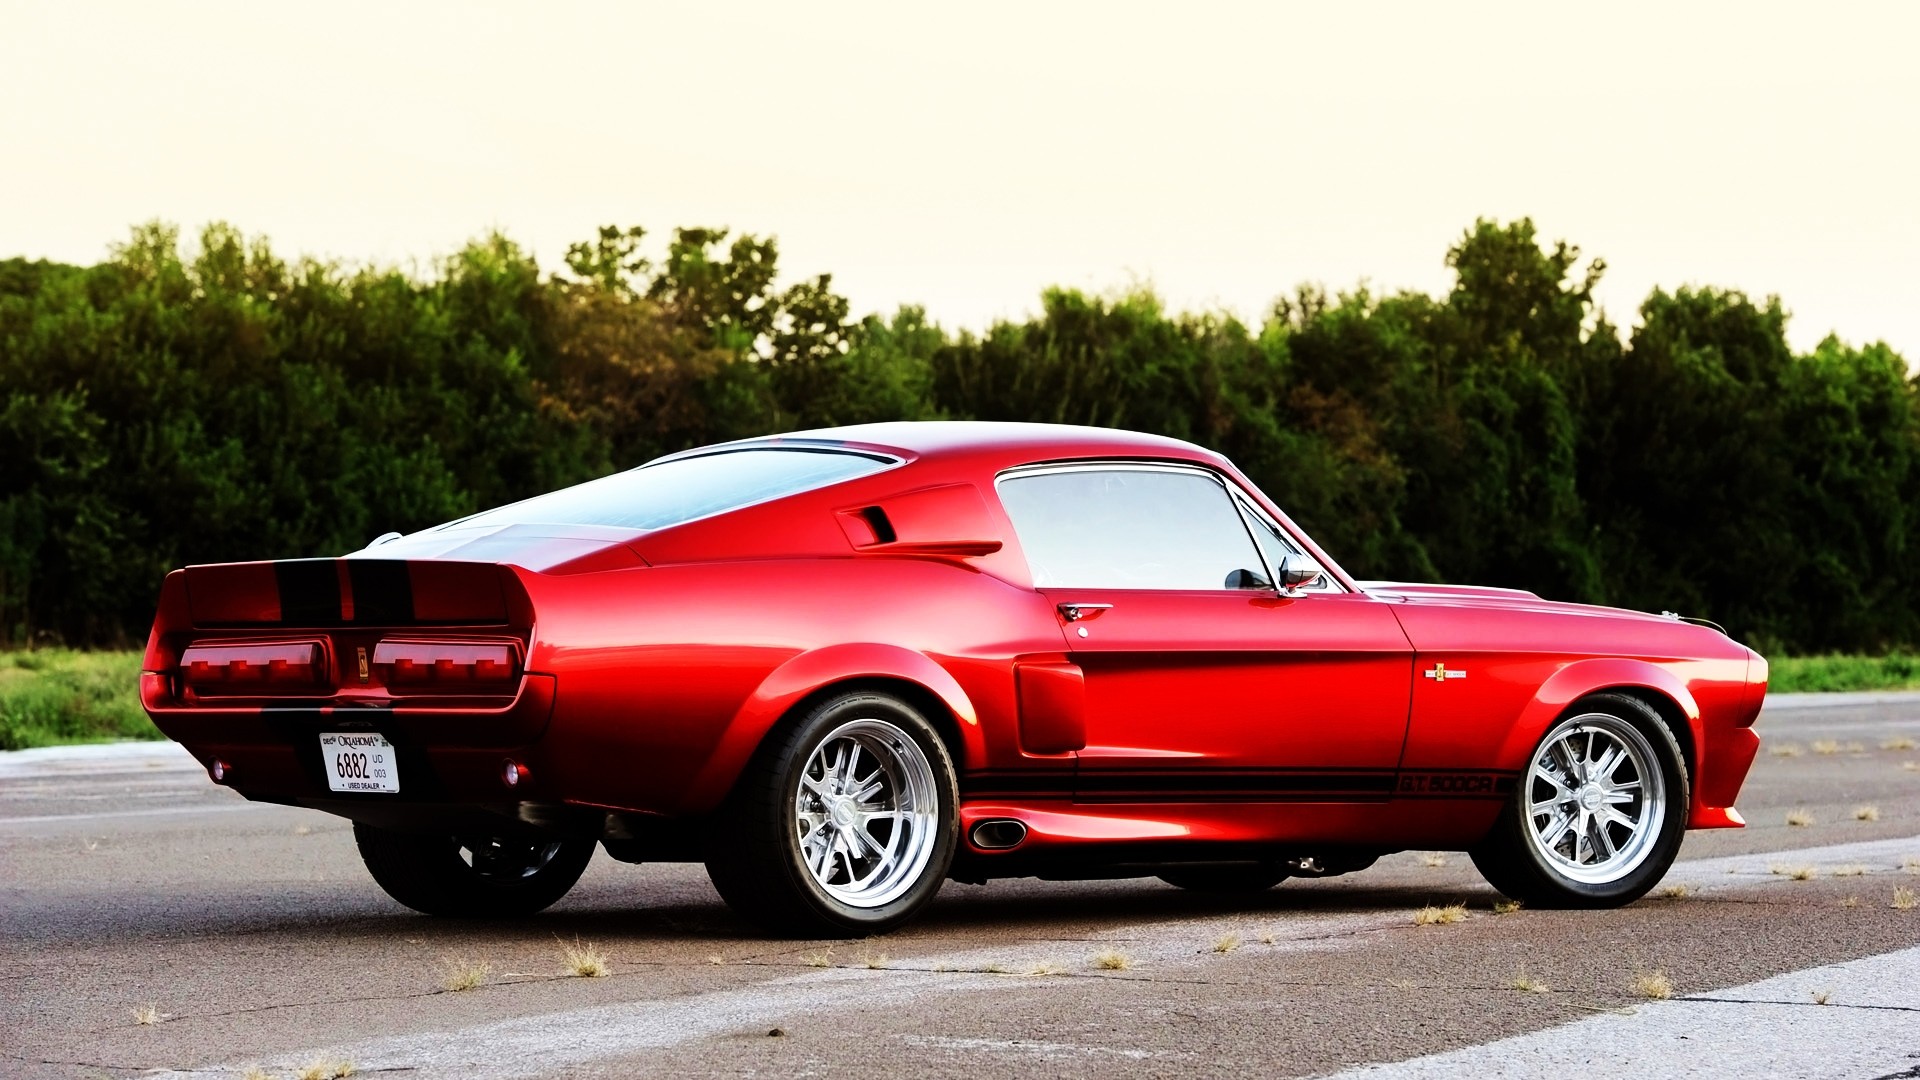 muscle cars, Shelby Mustang, Ford Mustang Shelby GT500, Mustang Fastback - desktop wallpaper